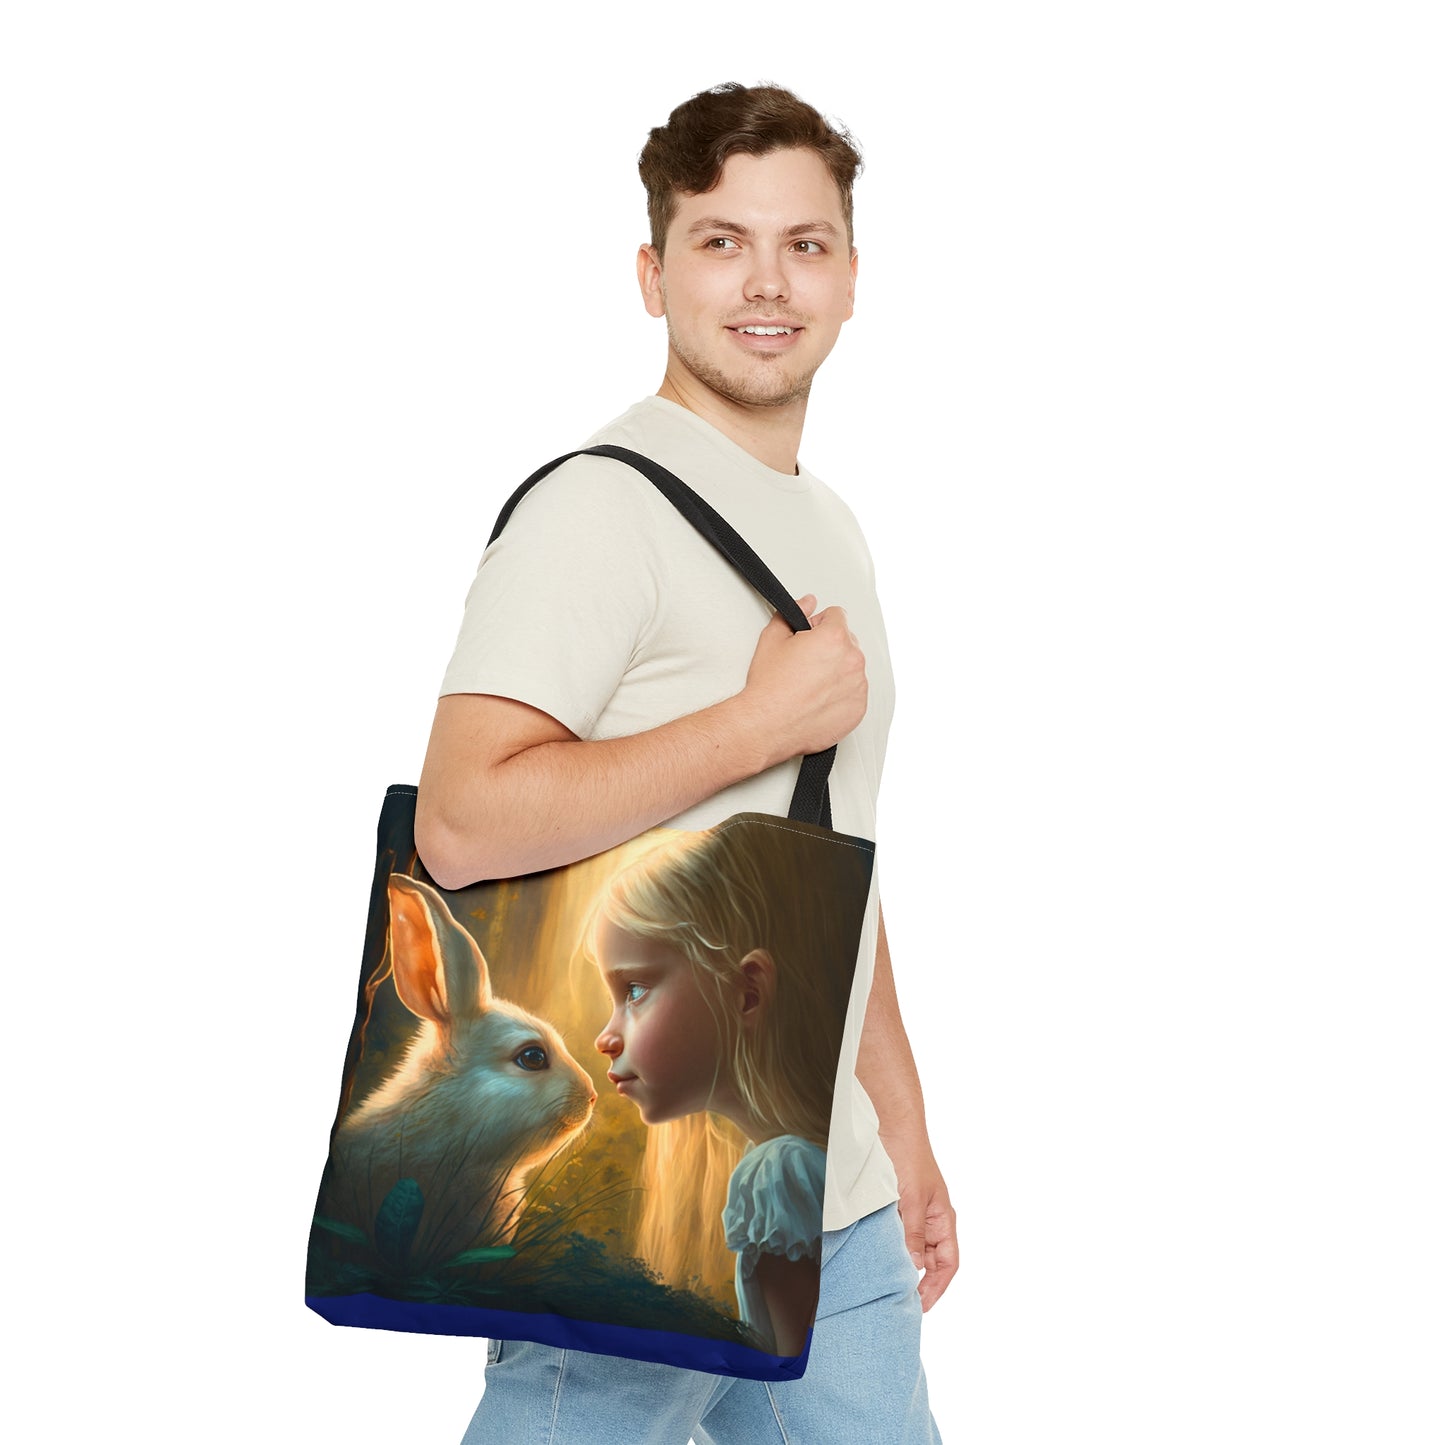 Tote Bag - Lucy and the Enchanted Forest 1